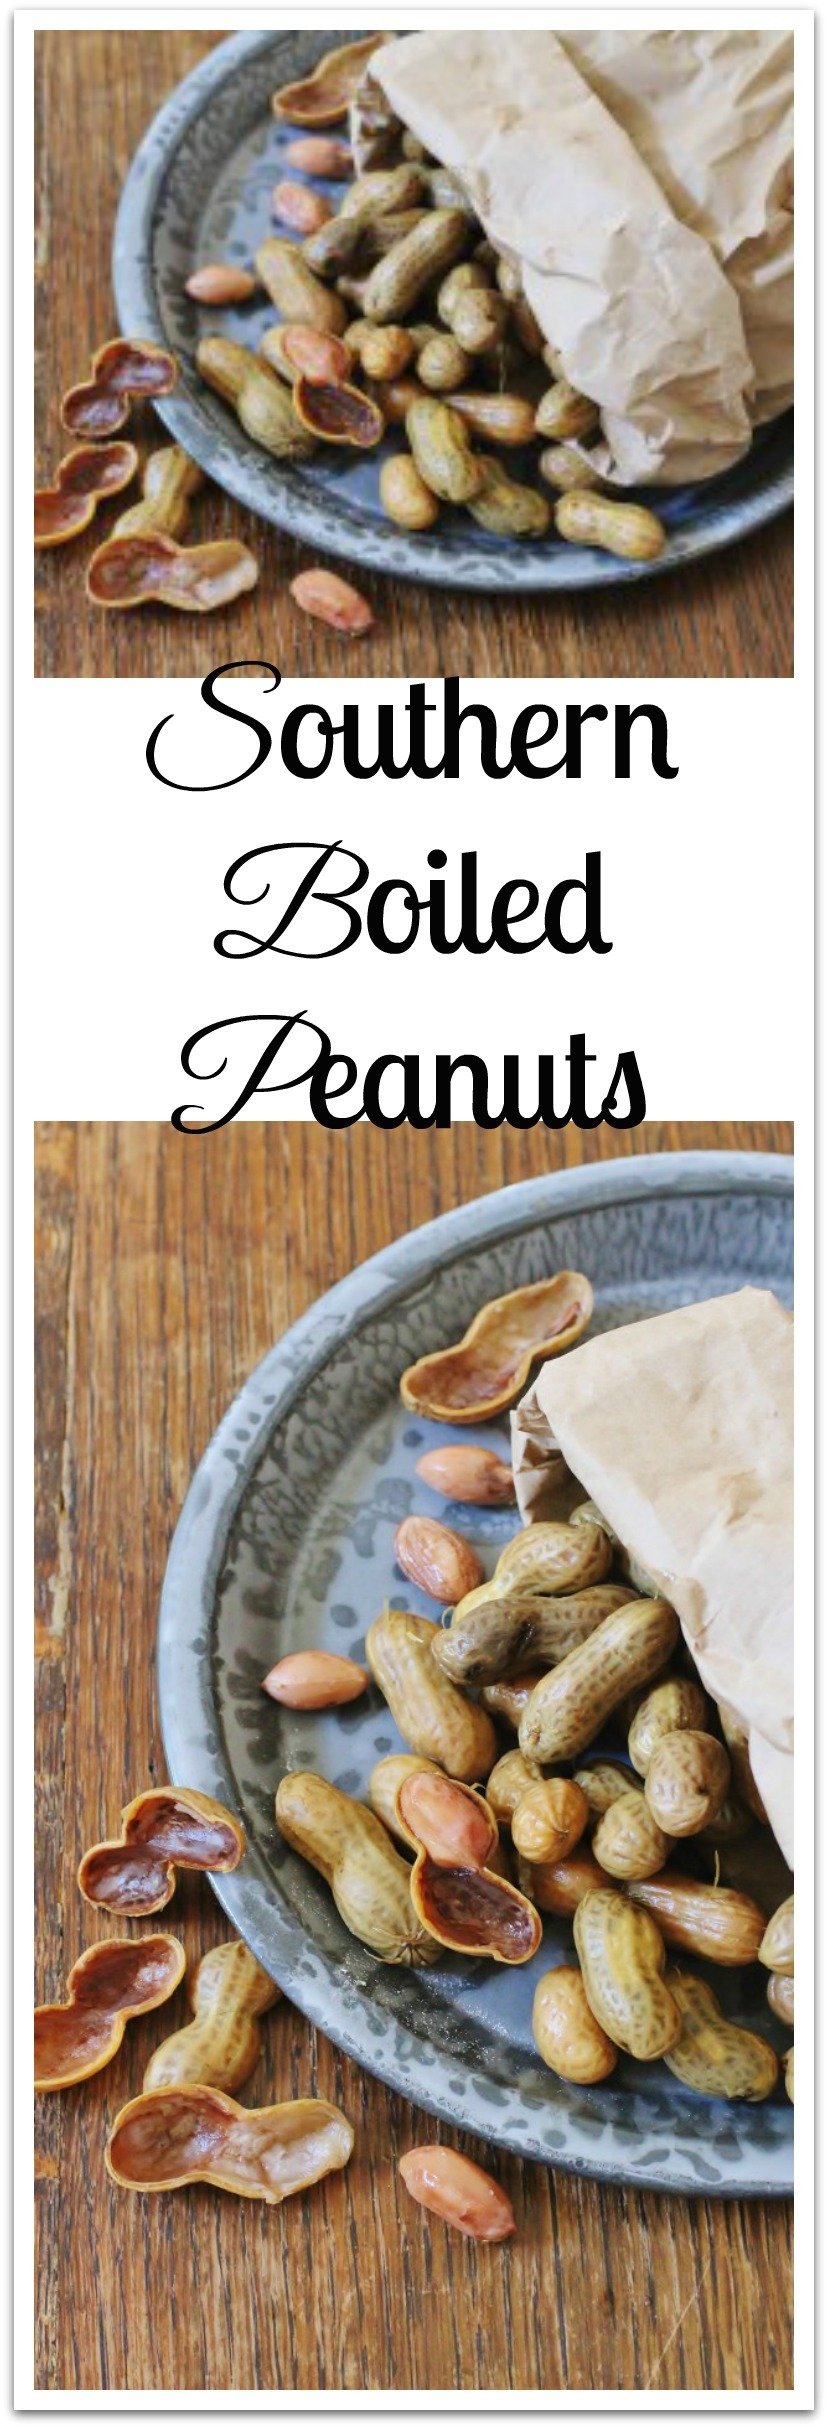 Boiled Peanuts, also known as goober peas,  are the bomb-diggity of Southern snack foods. #BoiledPeanuts #SouthernSnack